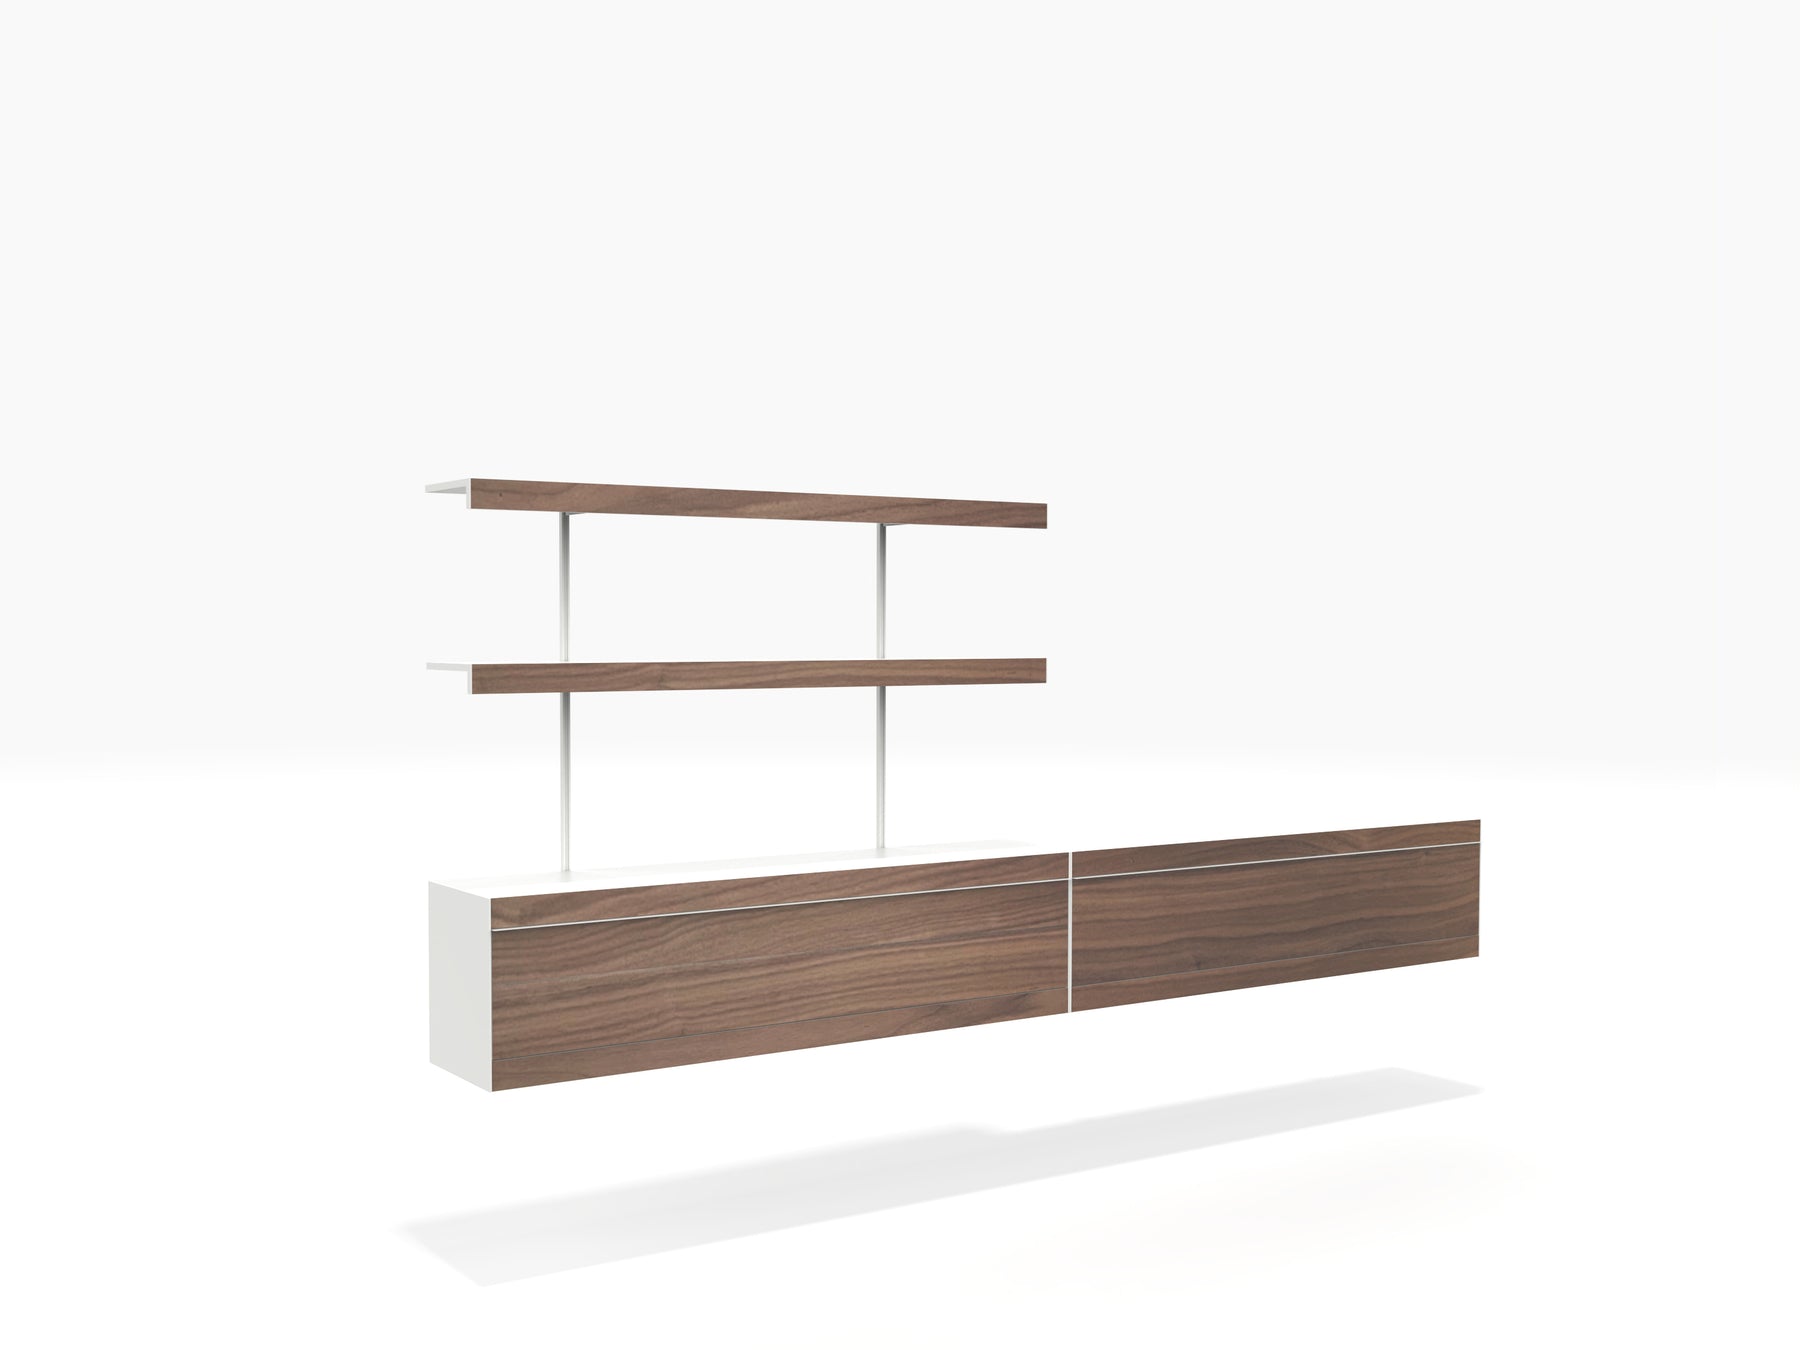 TV stand wall mounted shelving system in white and walnut